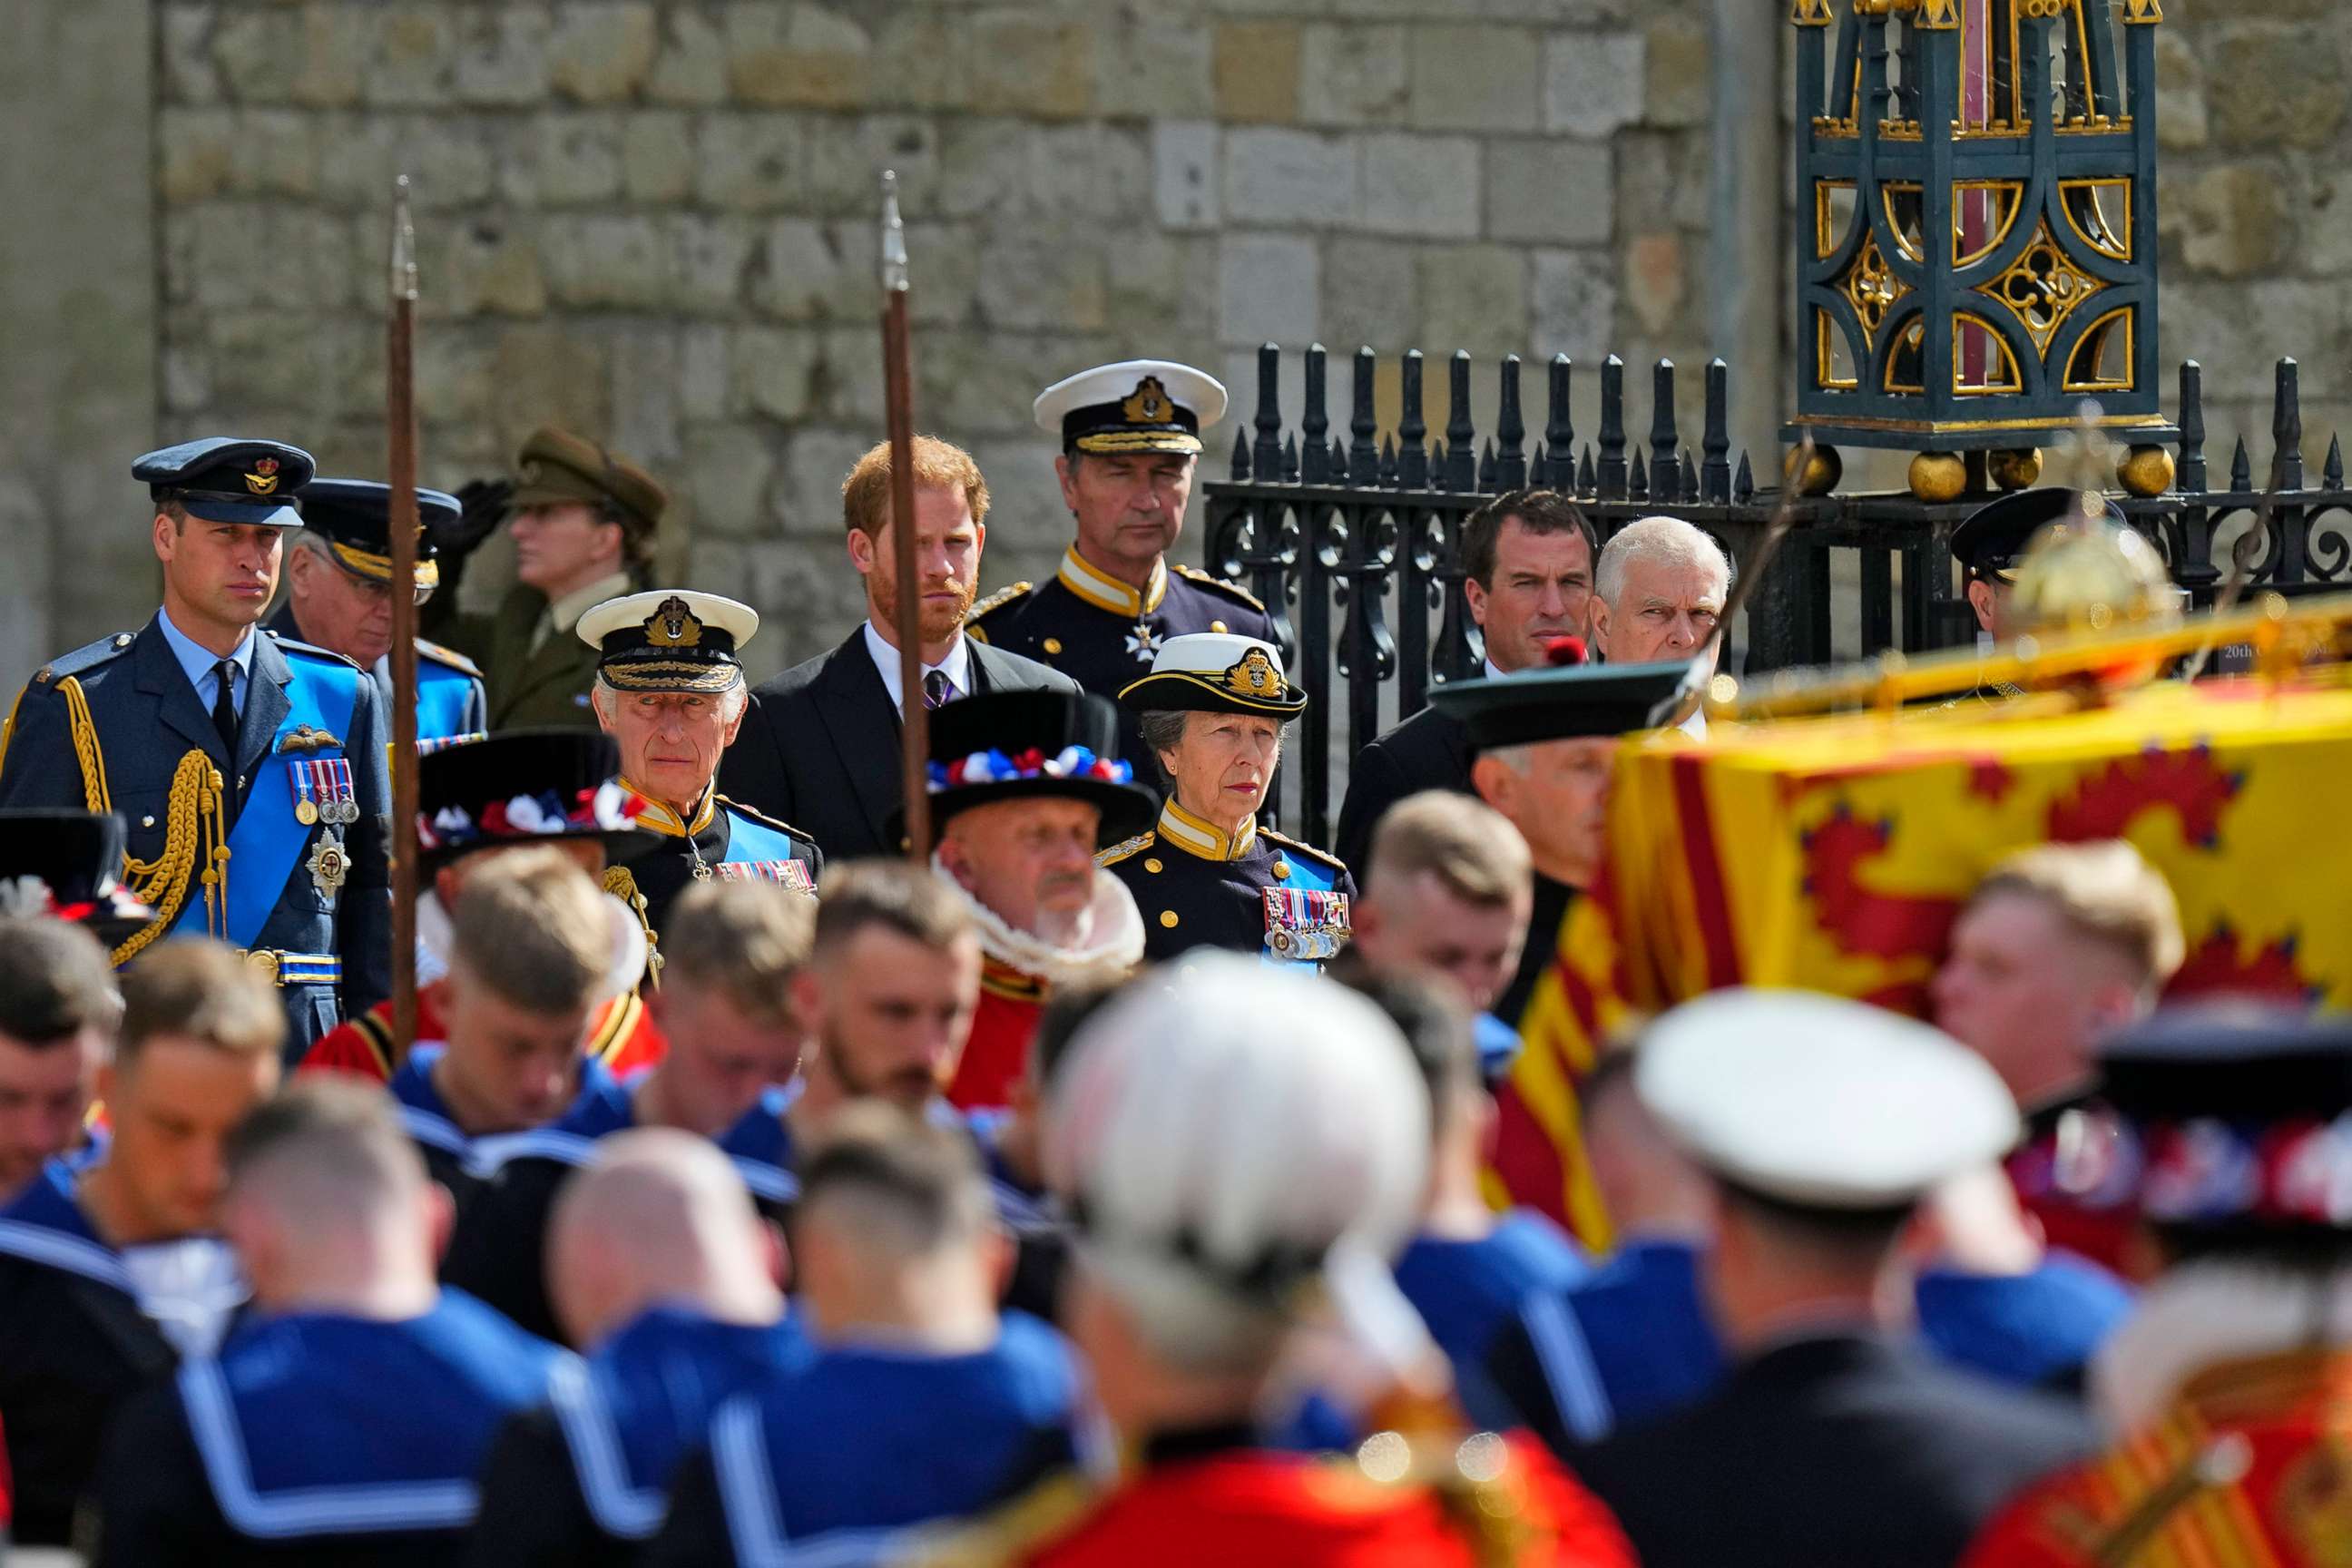 PHOTO: King Charles III, Princess Anne, Prince William, rear left, and Prince Harry, center rear, follow the coffin of Queen Elizabeth II as it is carried out of Westminster Abbey for her funeral in London, Sept. 19, 2022.